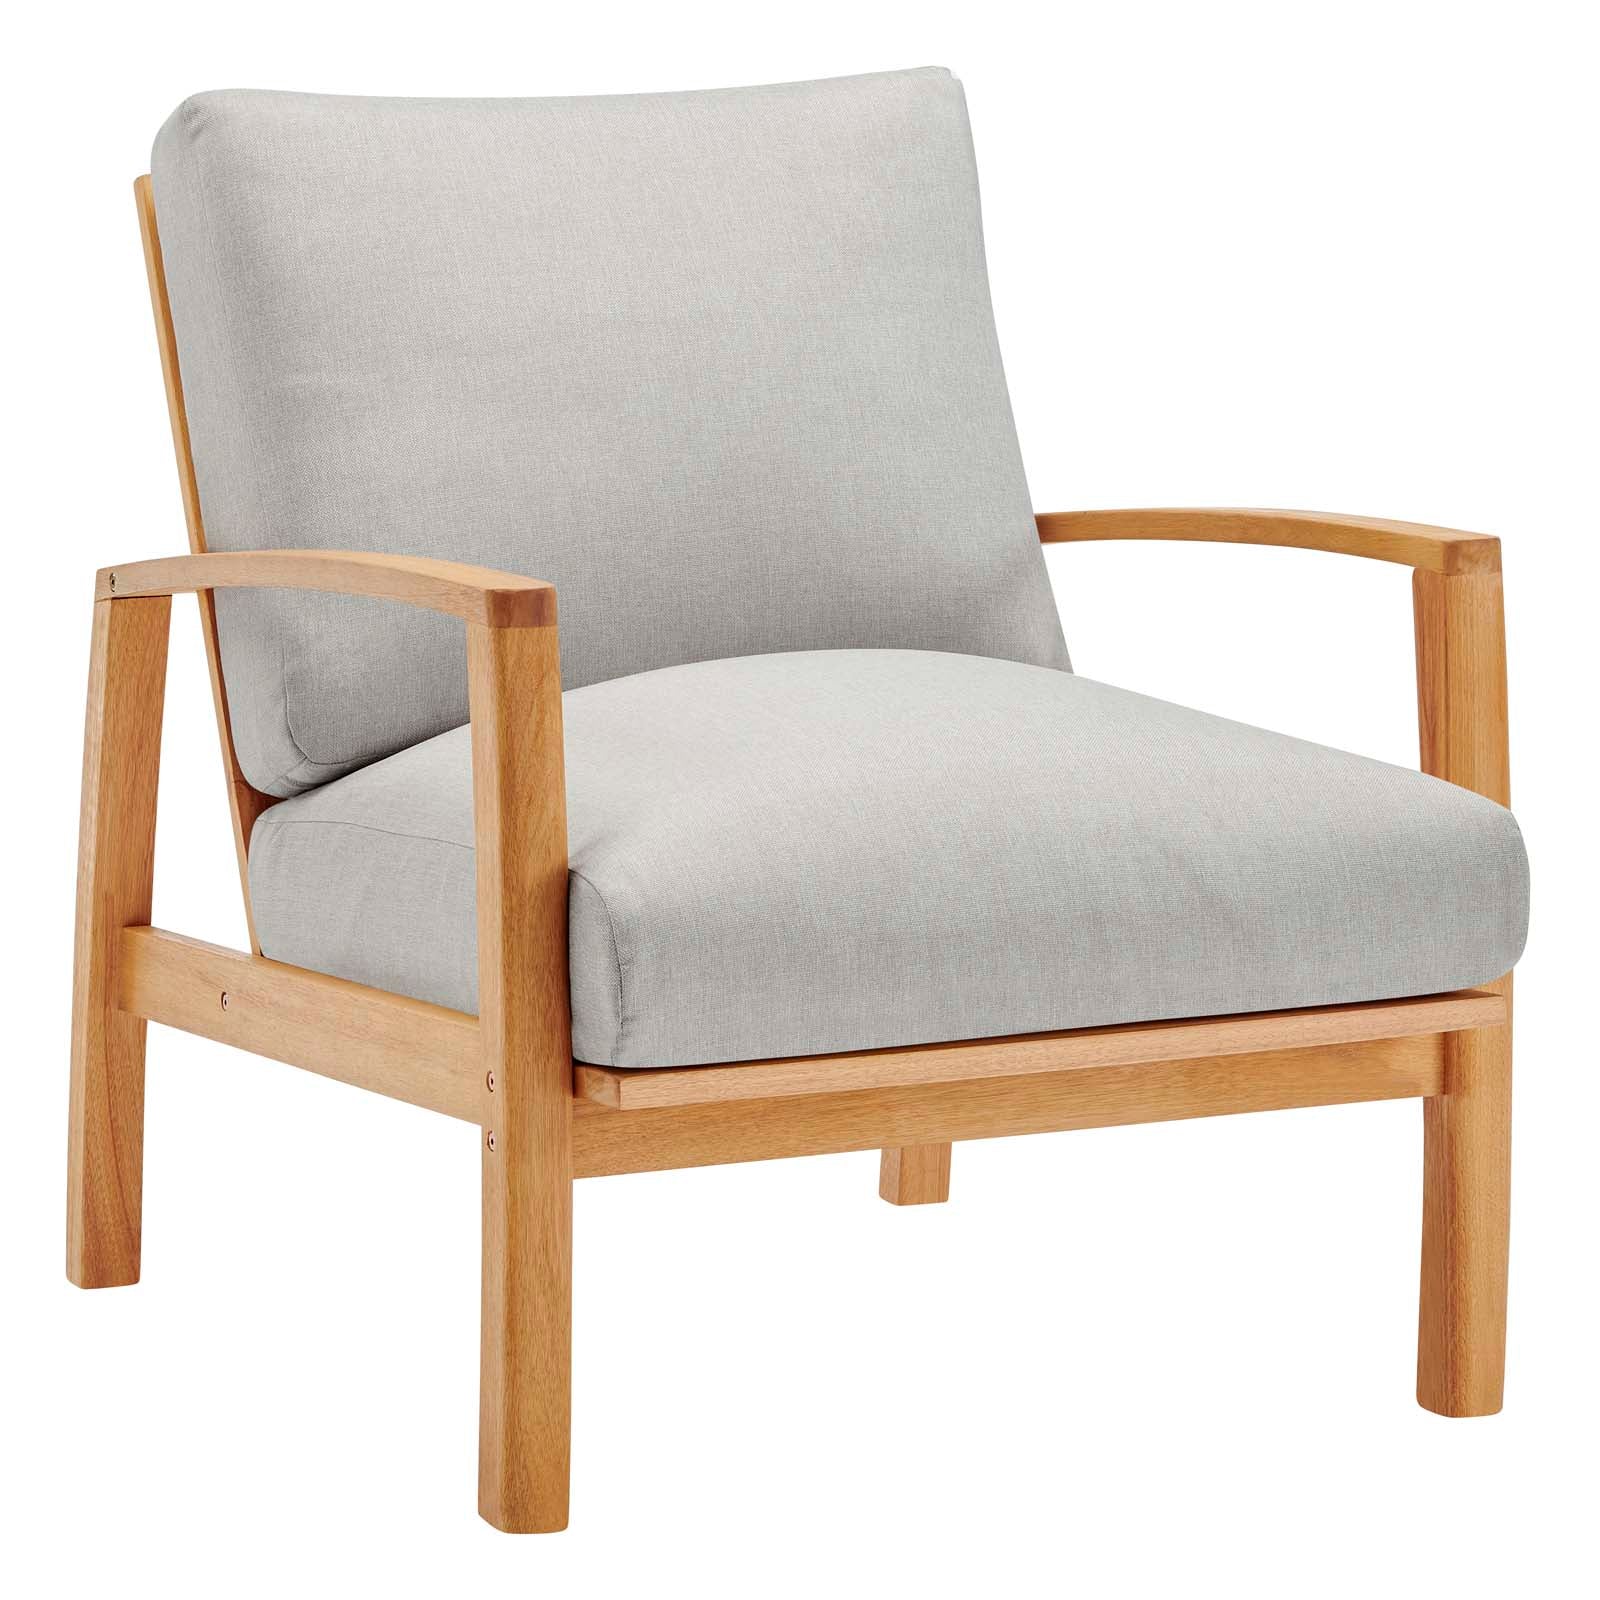 Orlean Outdoor Patio Eucalyptus Wood Lounge Armchair Set of 2 By Modway - EEI-3993